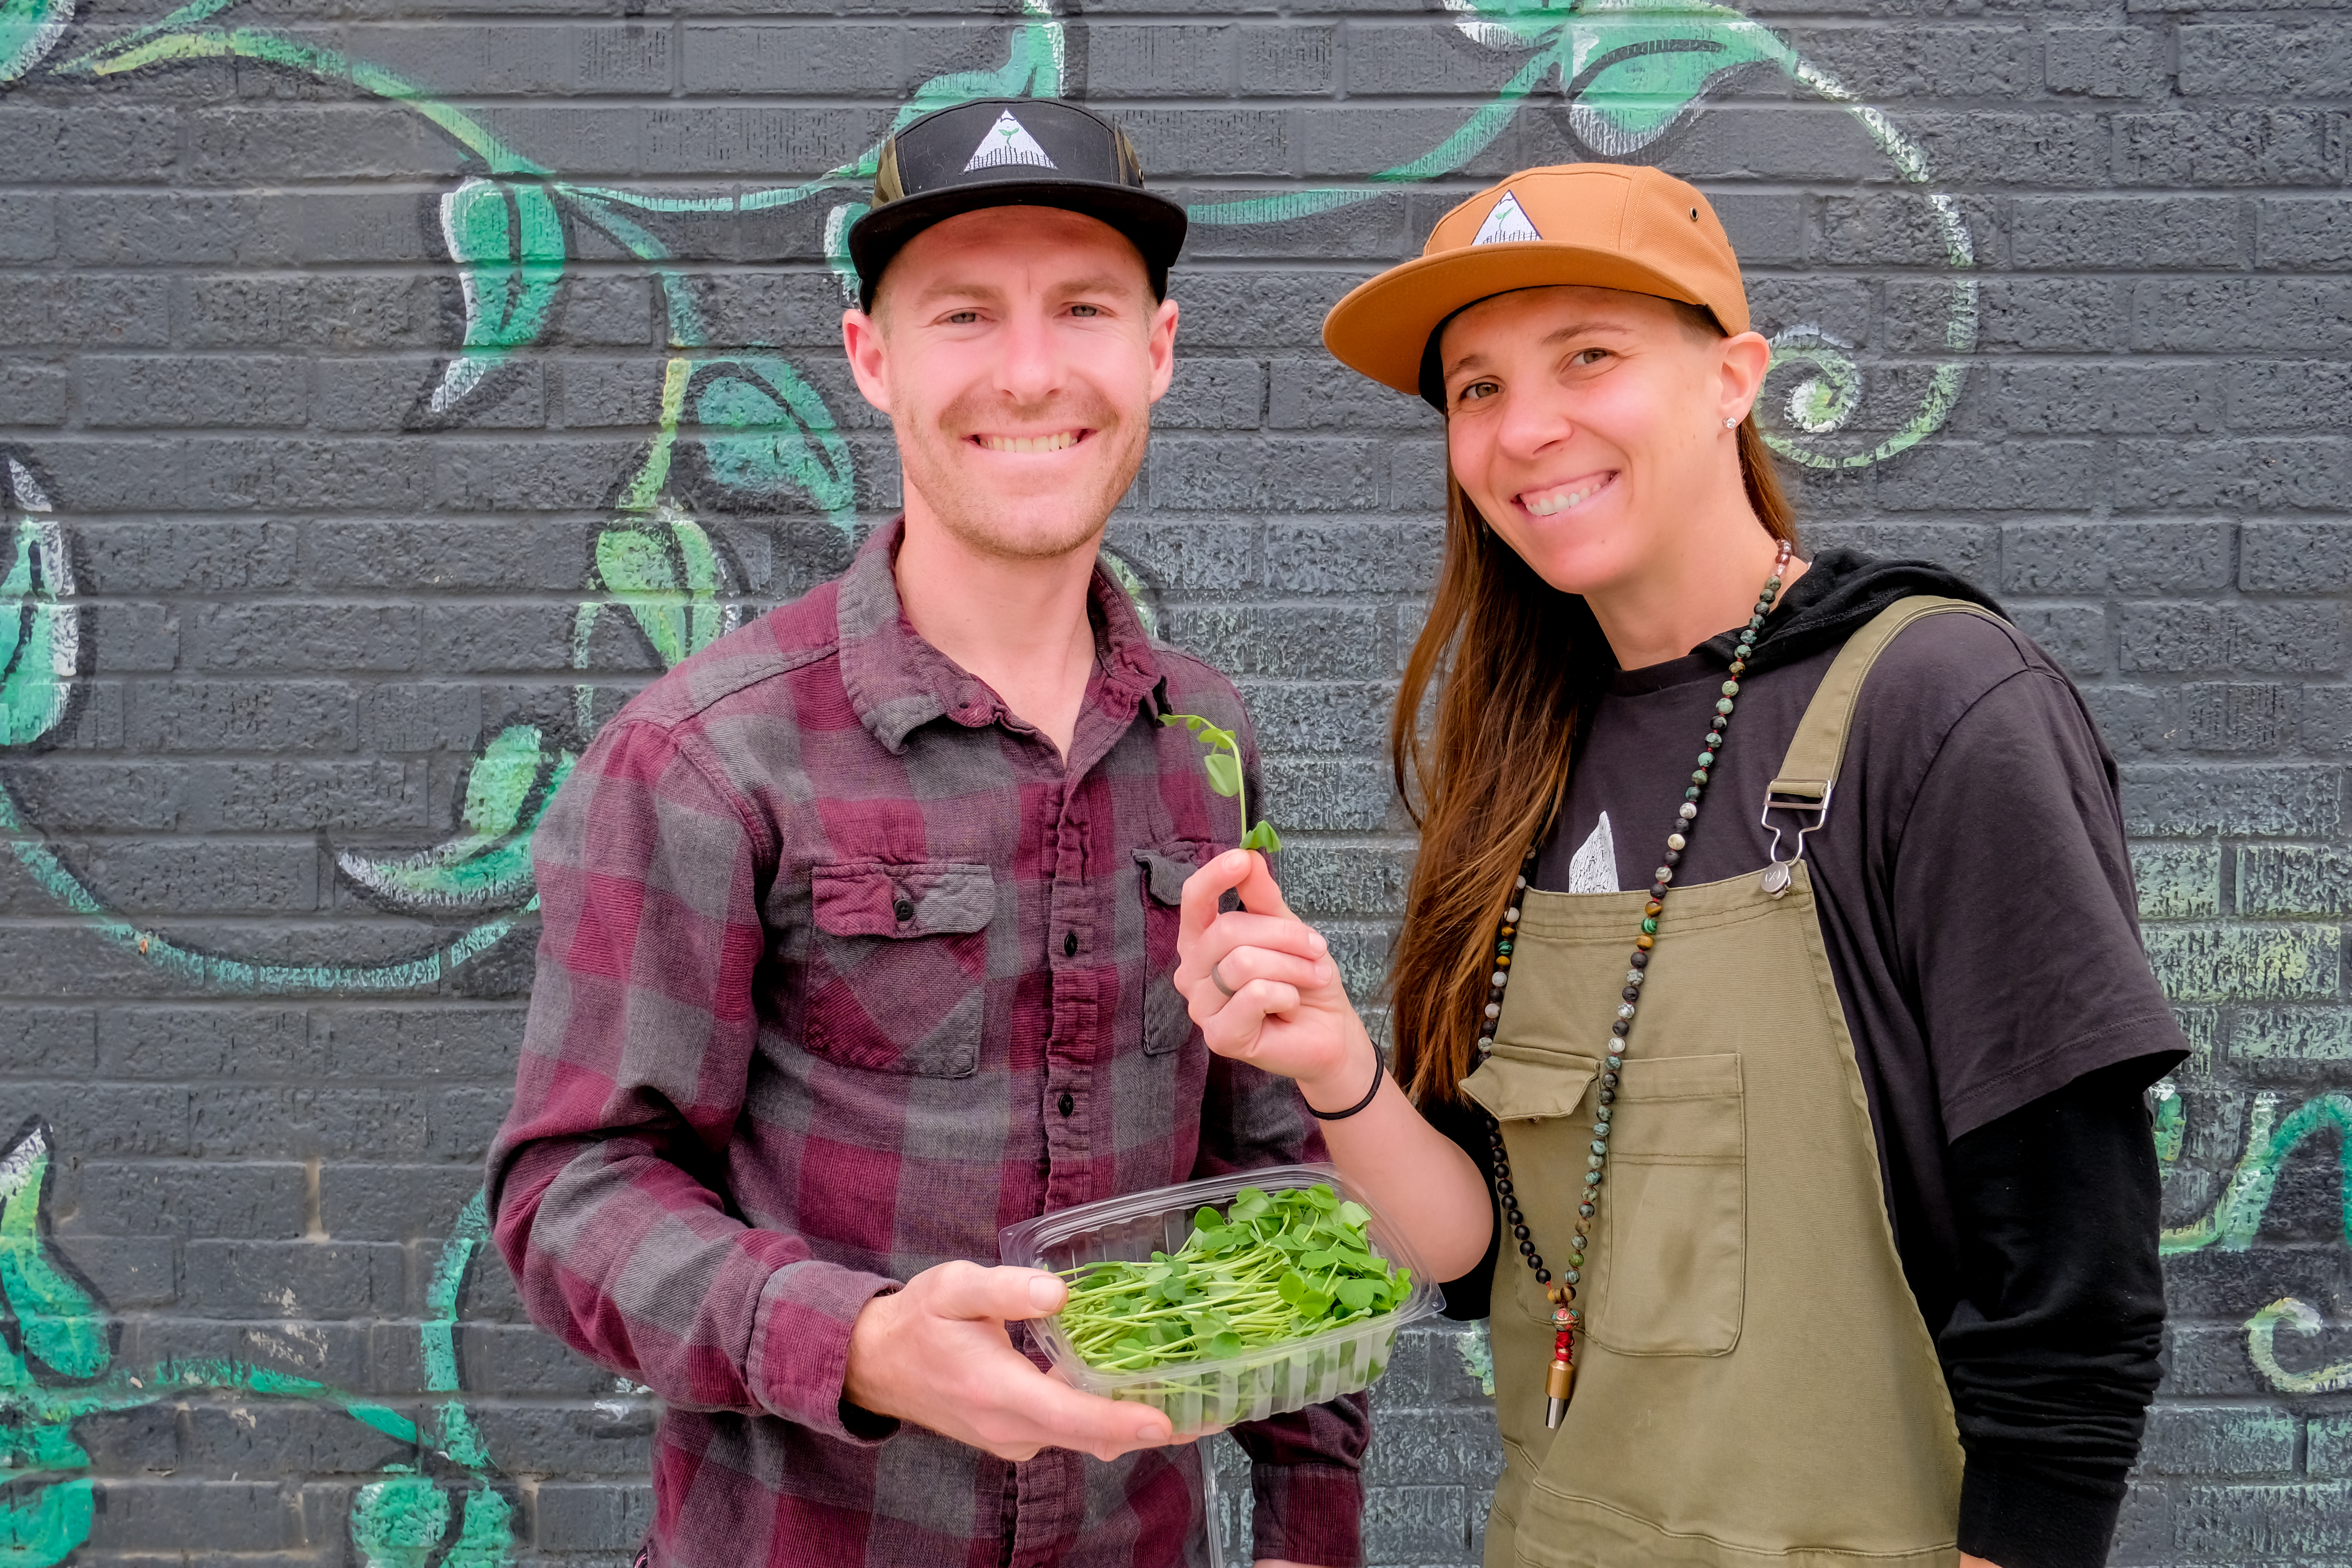 Fighting Adrenal Fatigue with Microgreens – Local Serial Entrepreneurs’ inside look at managing burnout while running multiple start-up companies